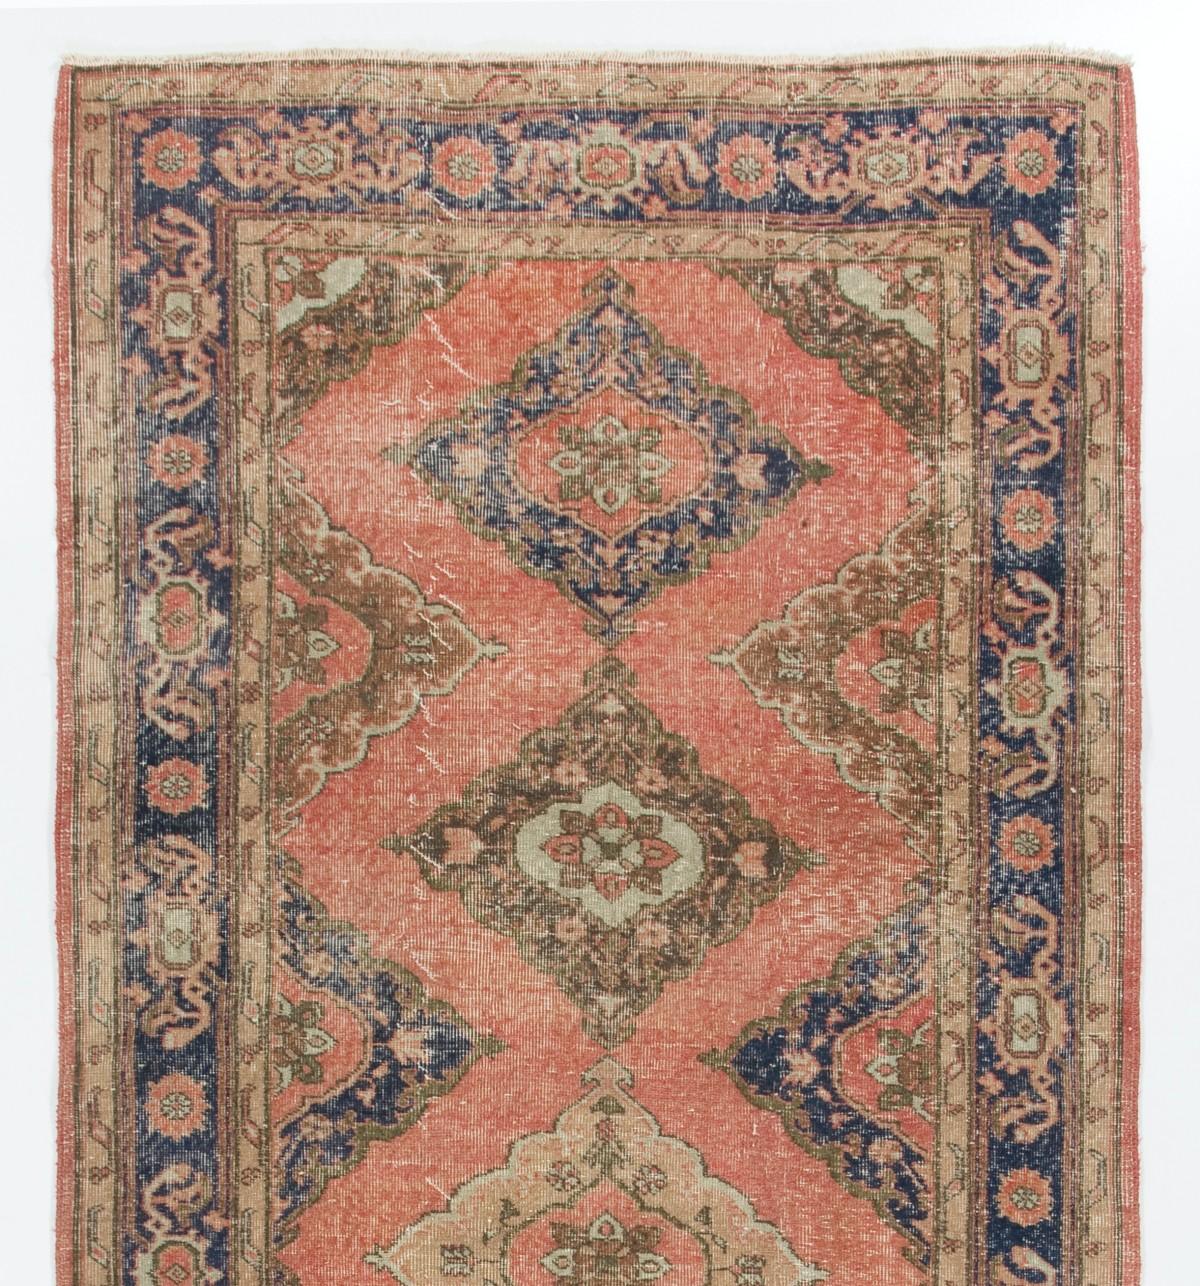 A vintage Turkish runner rug in red, navy blue, beige and green. It was hand-knotted in the 1960s with low wool on cotton foundation and features a multiple medallion design. It is in very good condition, professionally-washed, sturdy and suitable